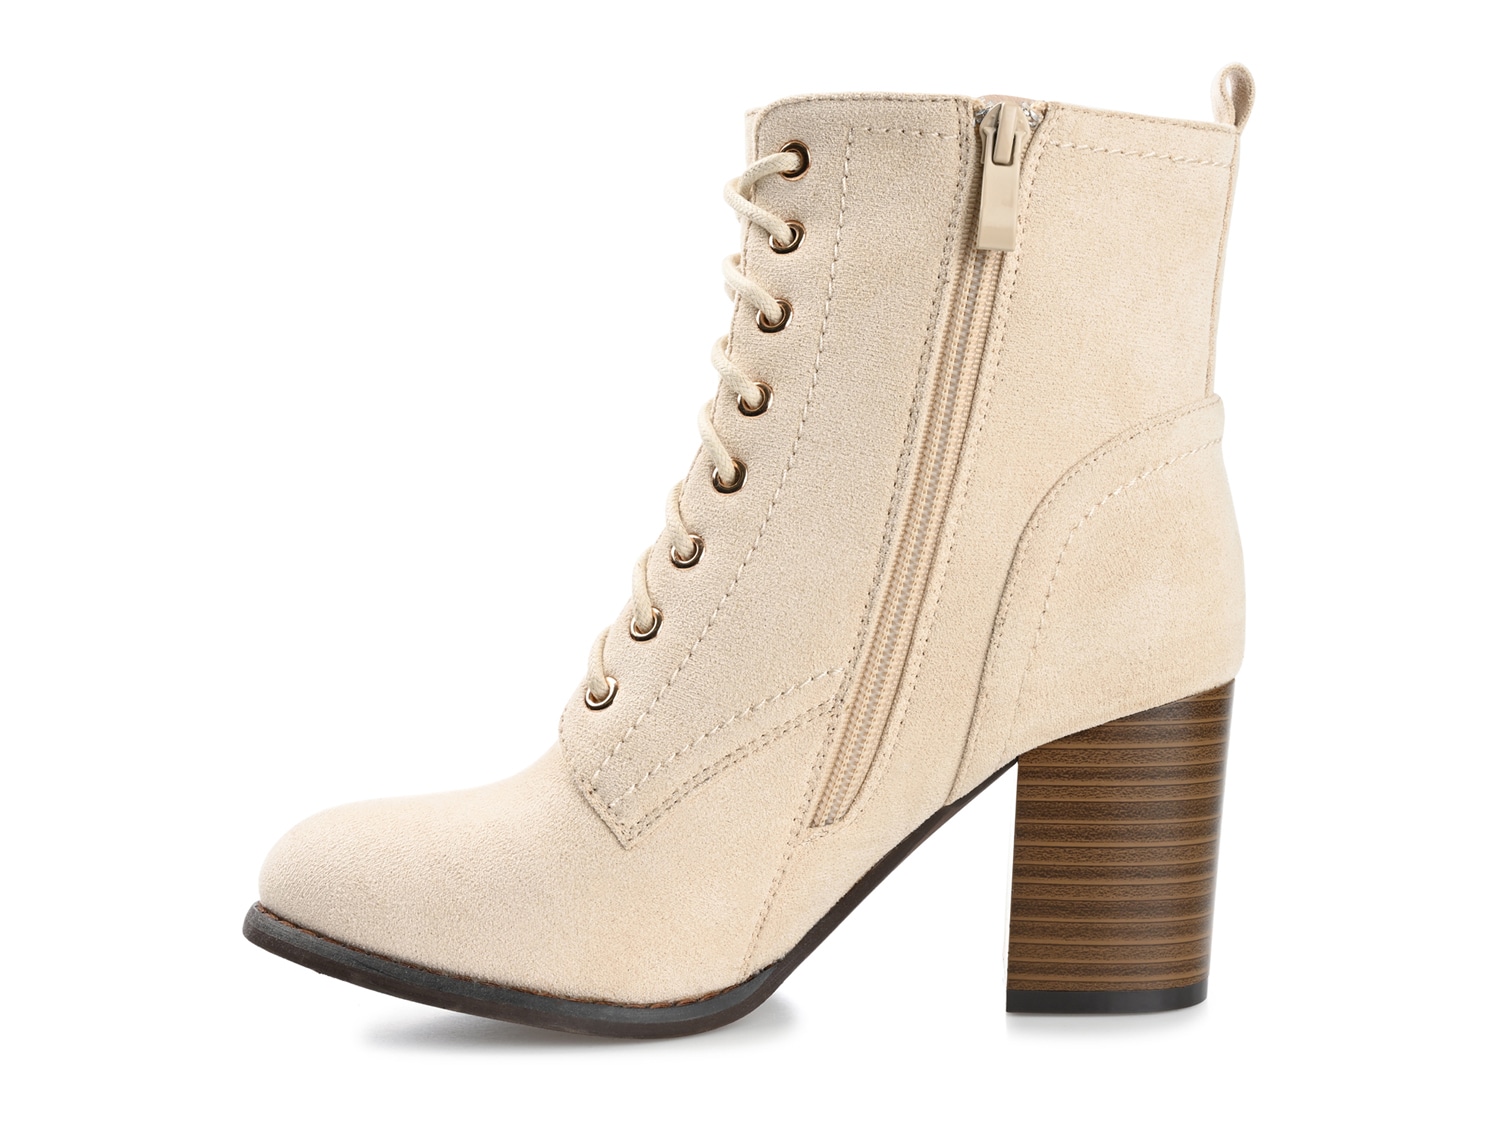 Journee Collection Baylor Bootie | DSW